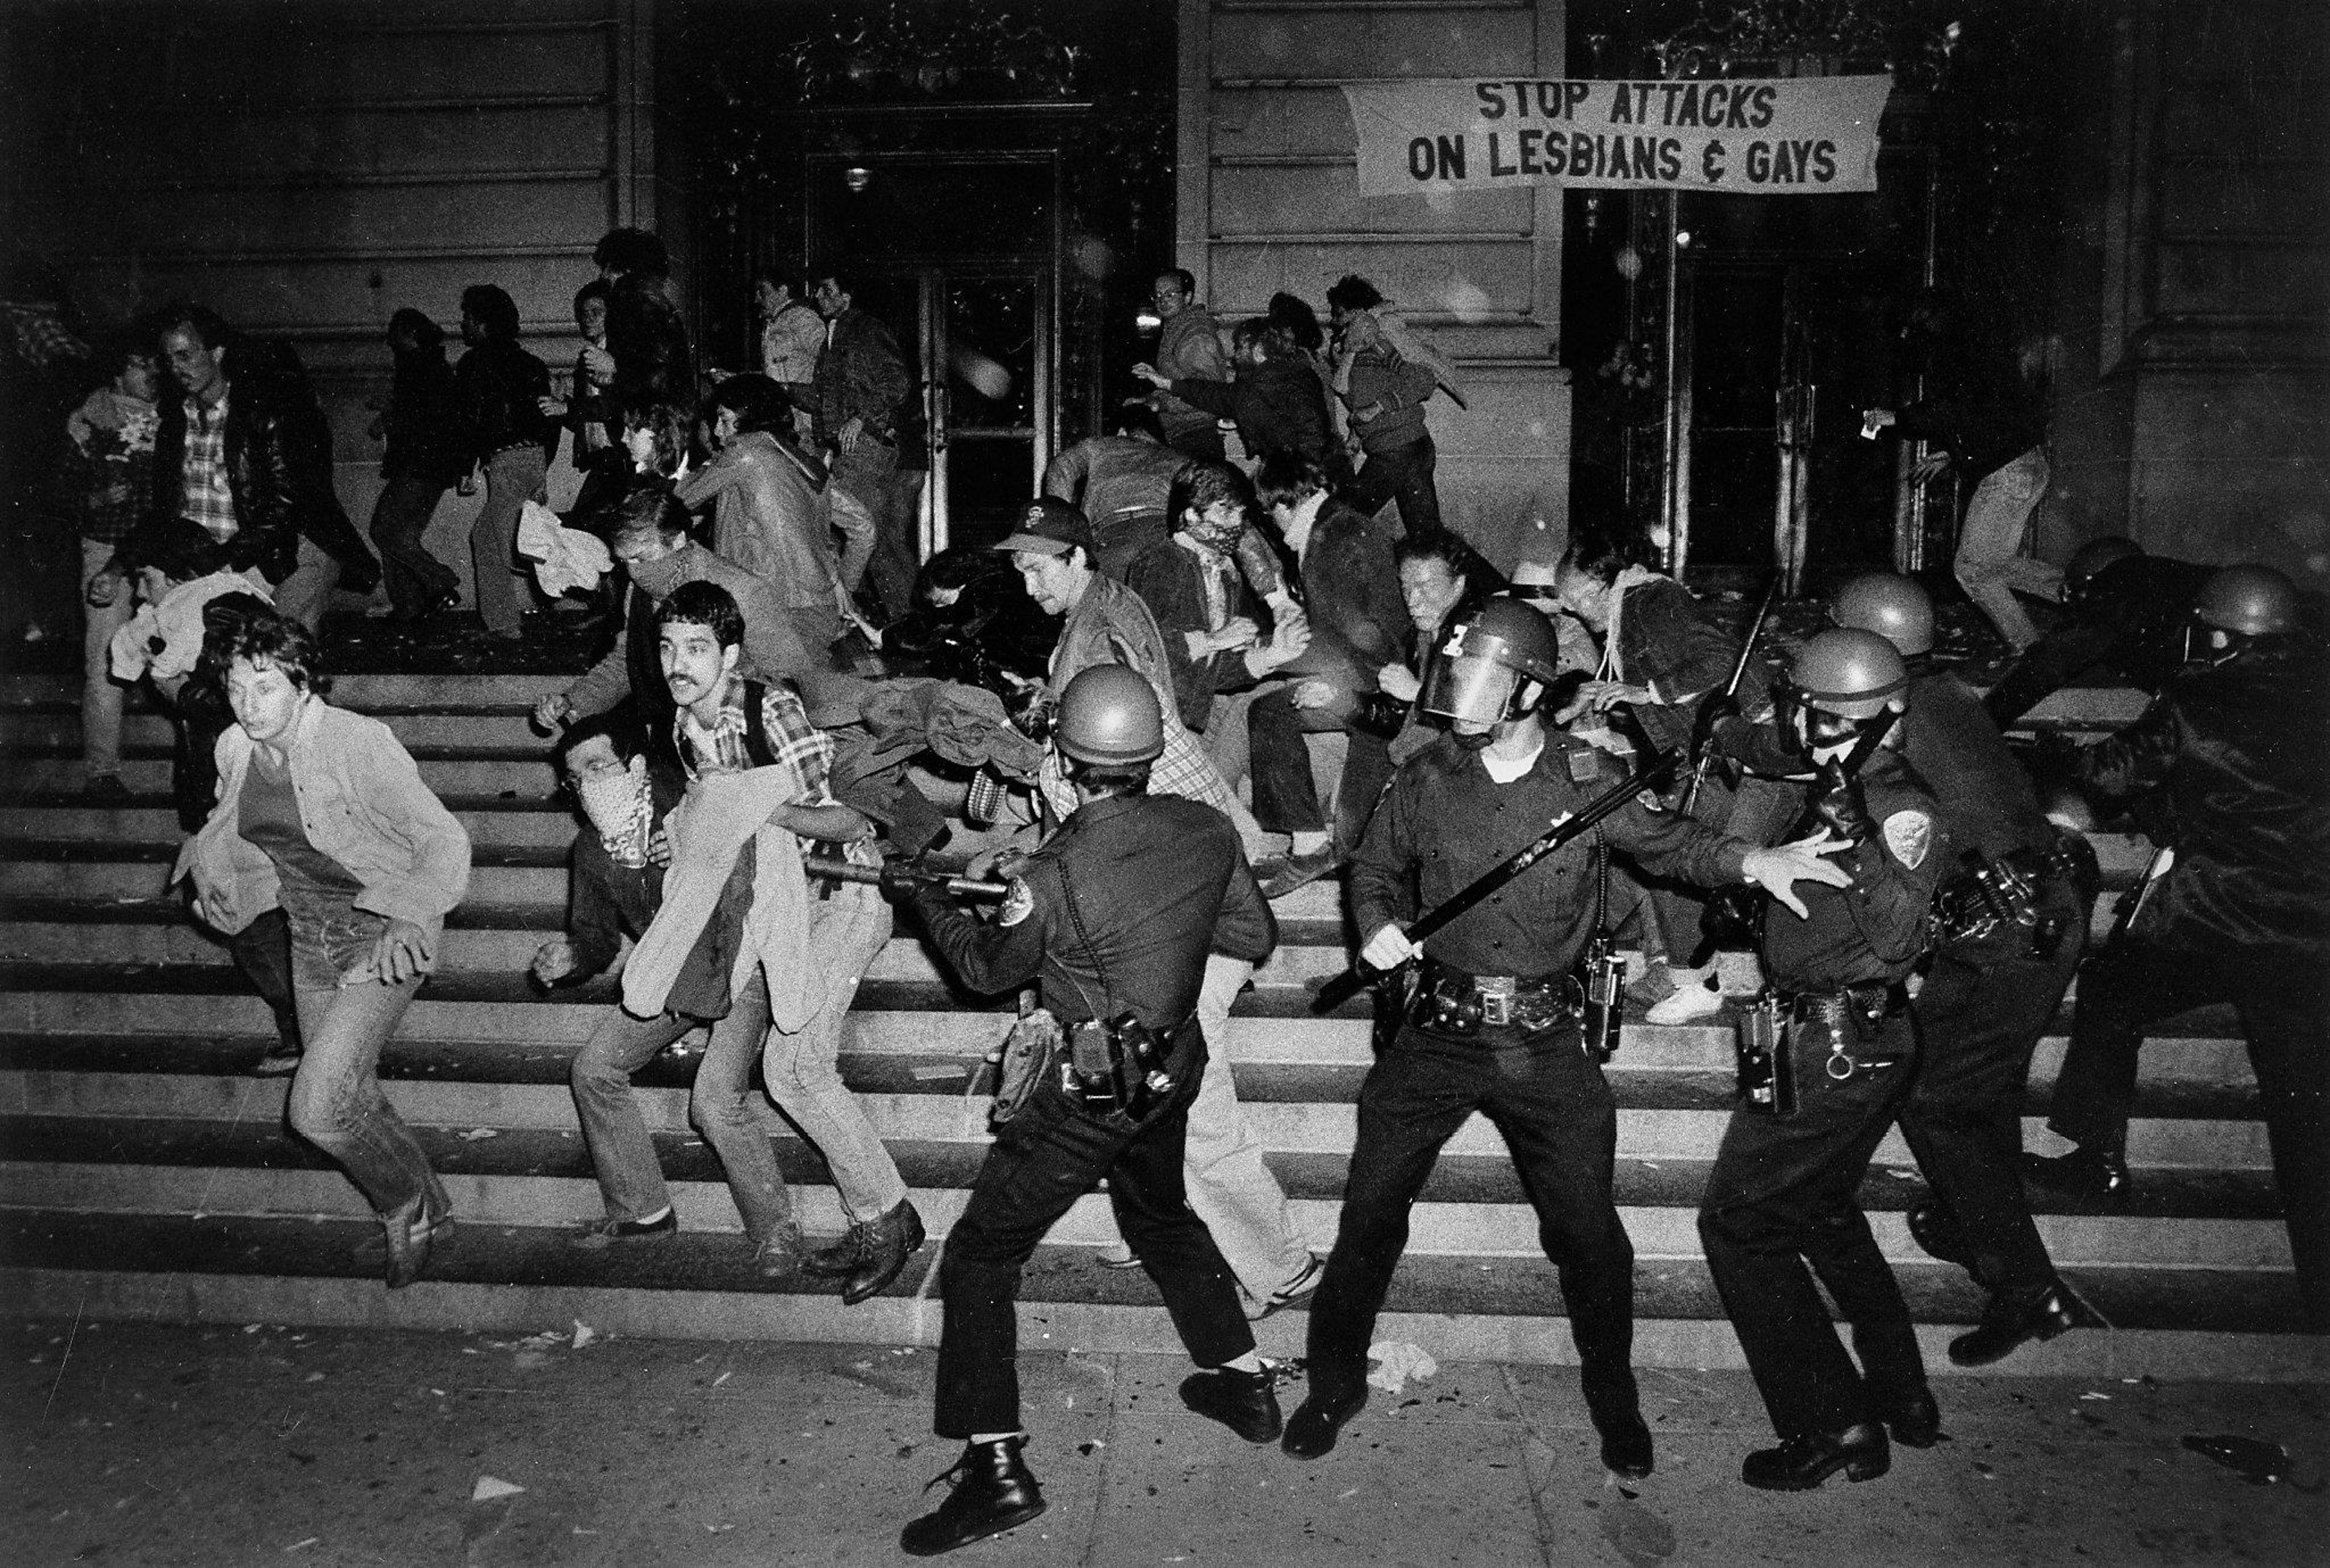 a black and white photo from an lgbtq riot with cops and protesters